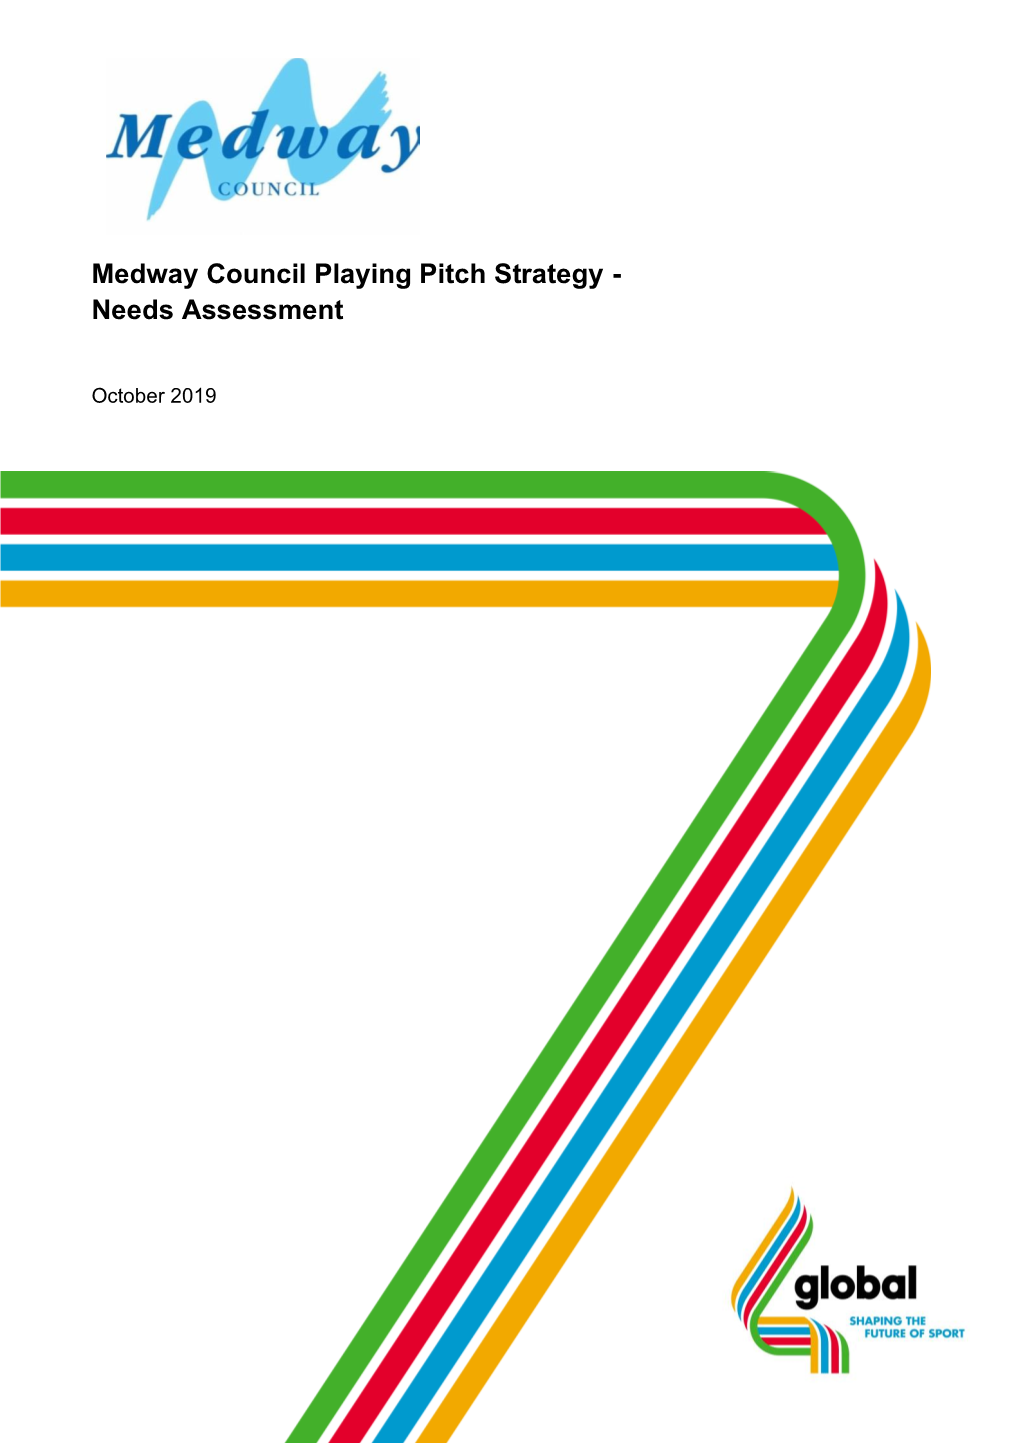 Medway Council Playing Pitch Strategy - Needs Assessment